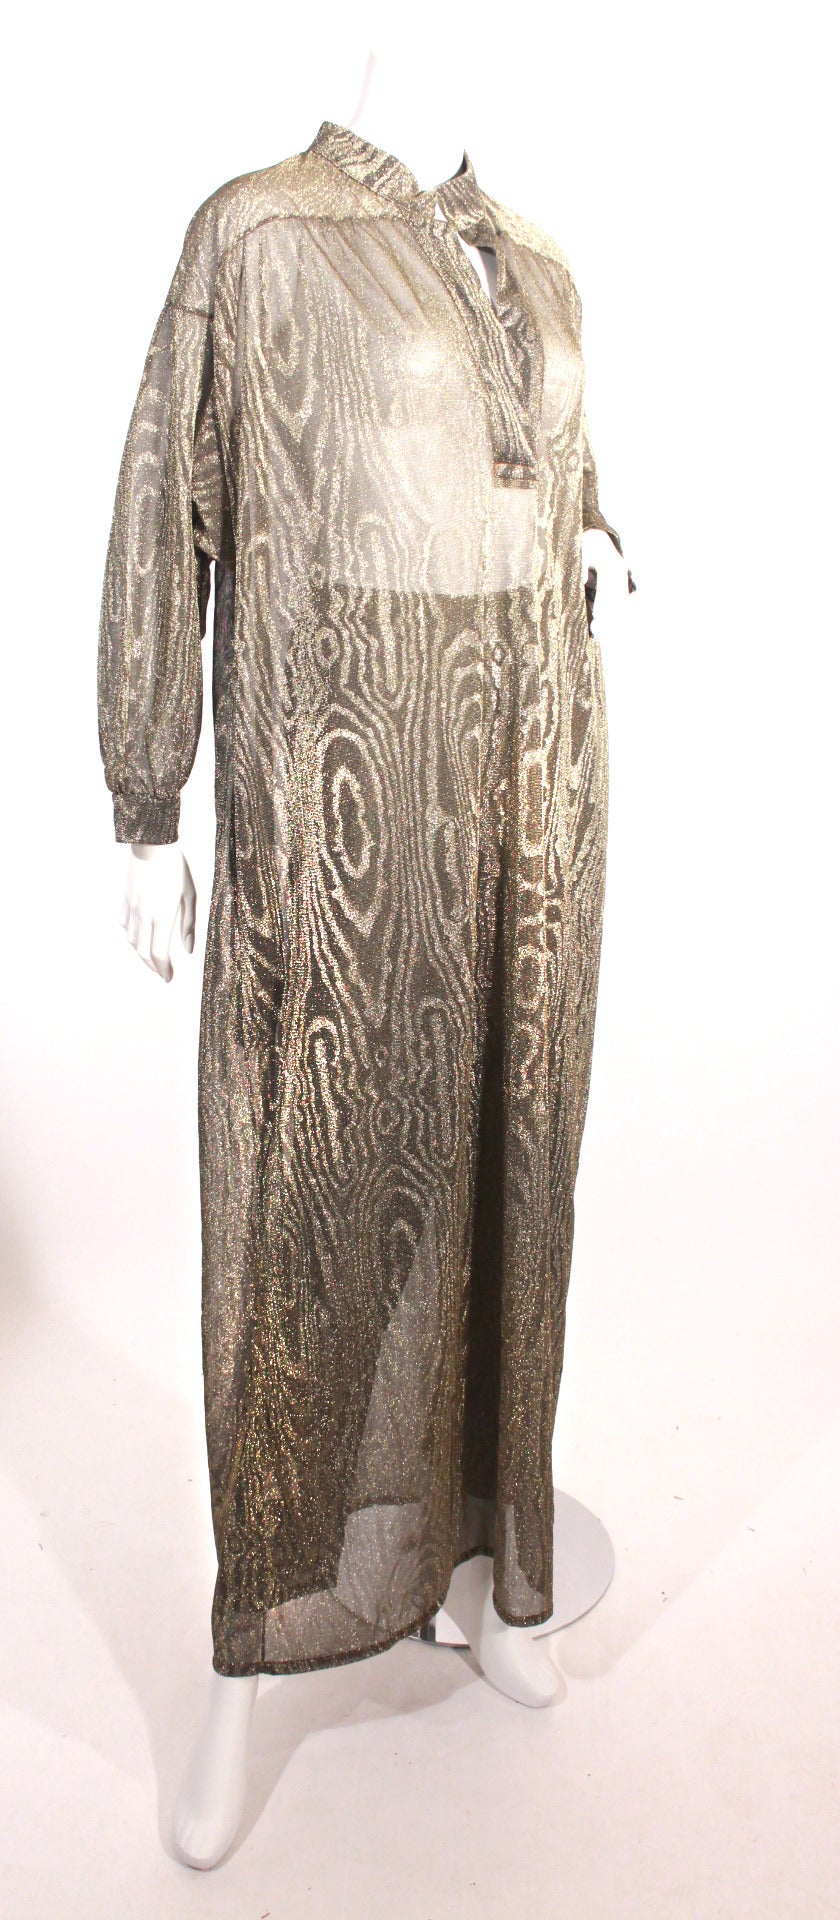 1970s Vintage 3 piece Clovis Ruffin ensemble. Made up of pants, caftan, and blouse. Metallic hold lurex material, elastic waist band. Mint condition, perfect summer set. 

Size Small
Pant Length 40 in.
Blouse small
Caftan Length 50 in